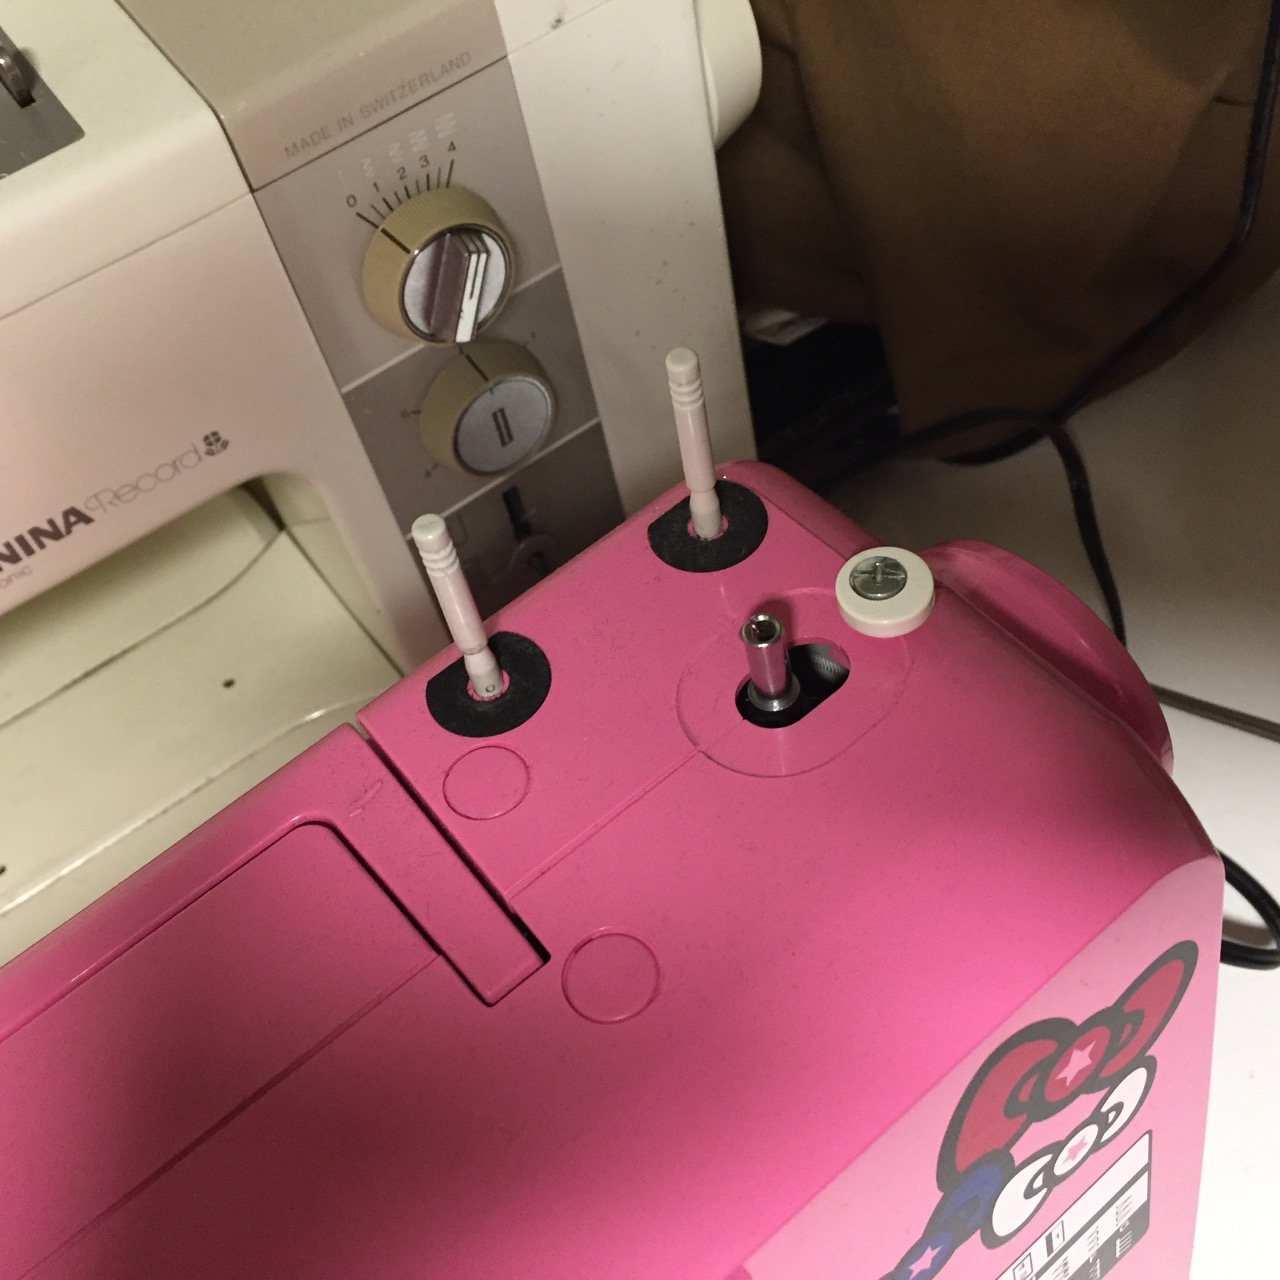 Janome® Pink Sorbet Easy-to-Use Sewing Machine